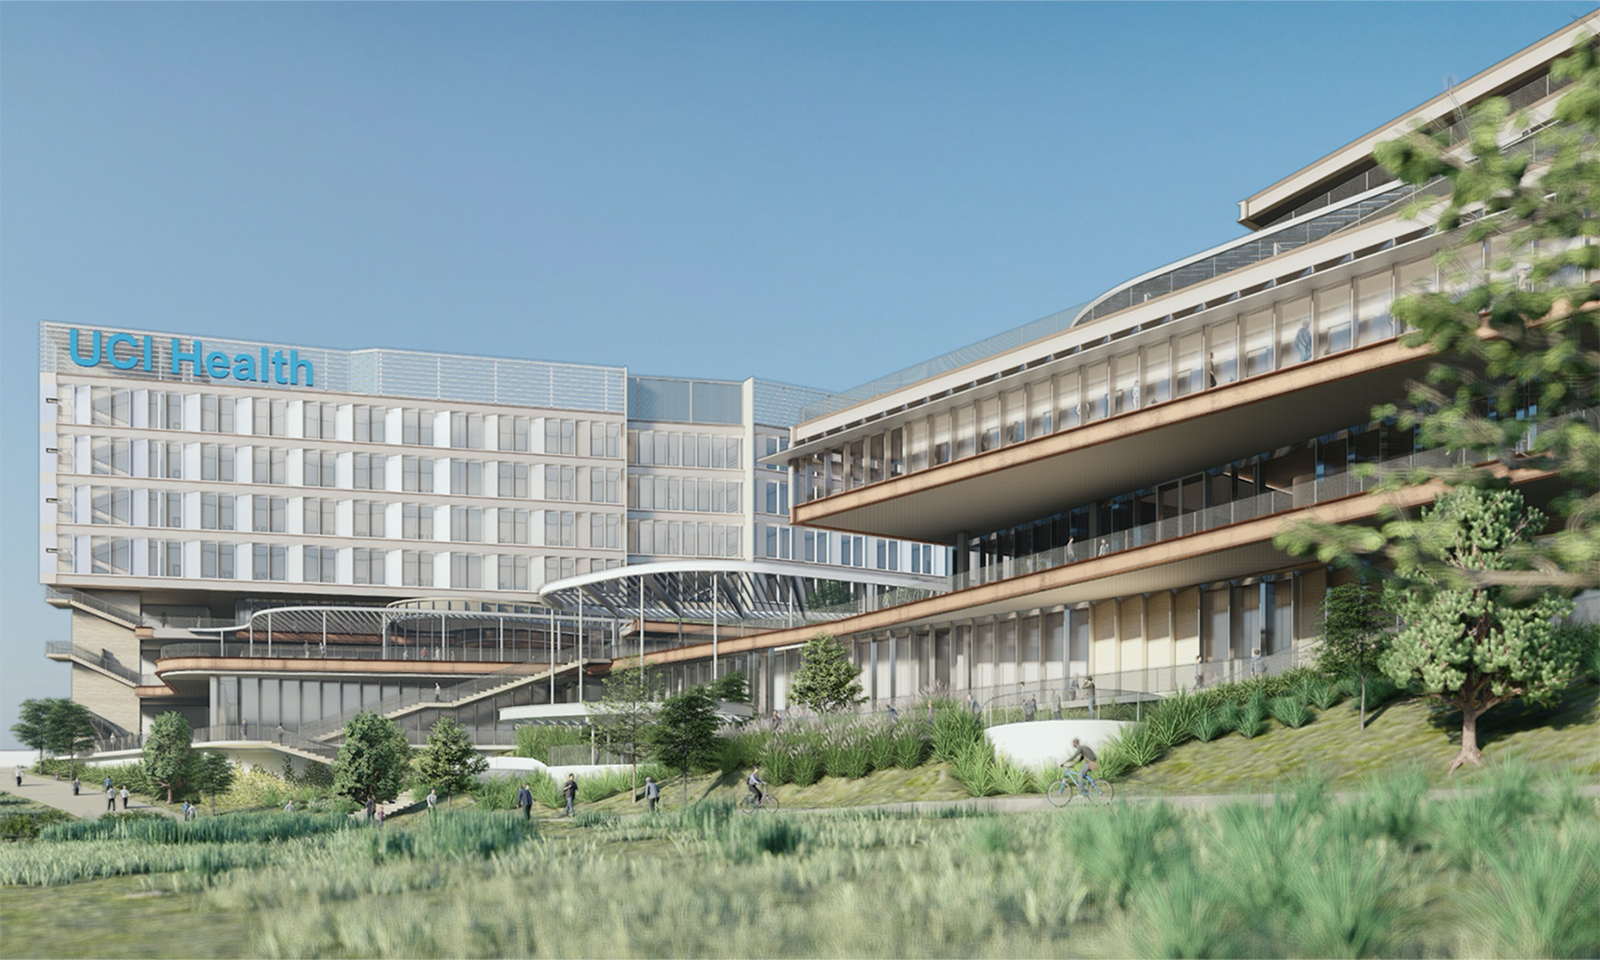 UCI is building a $1 billion medical center